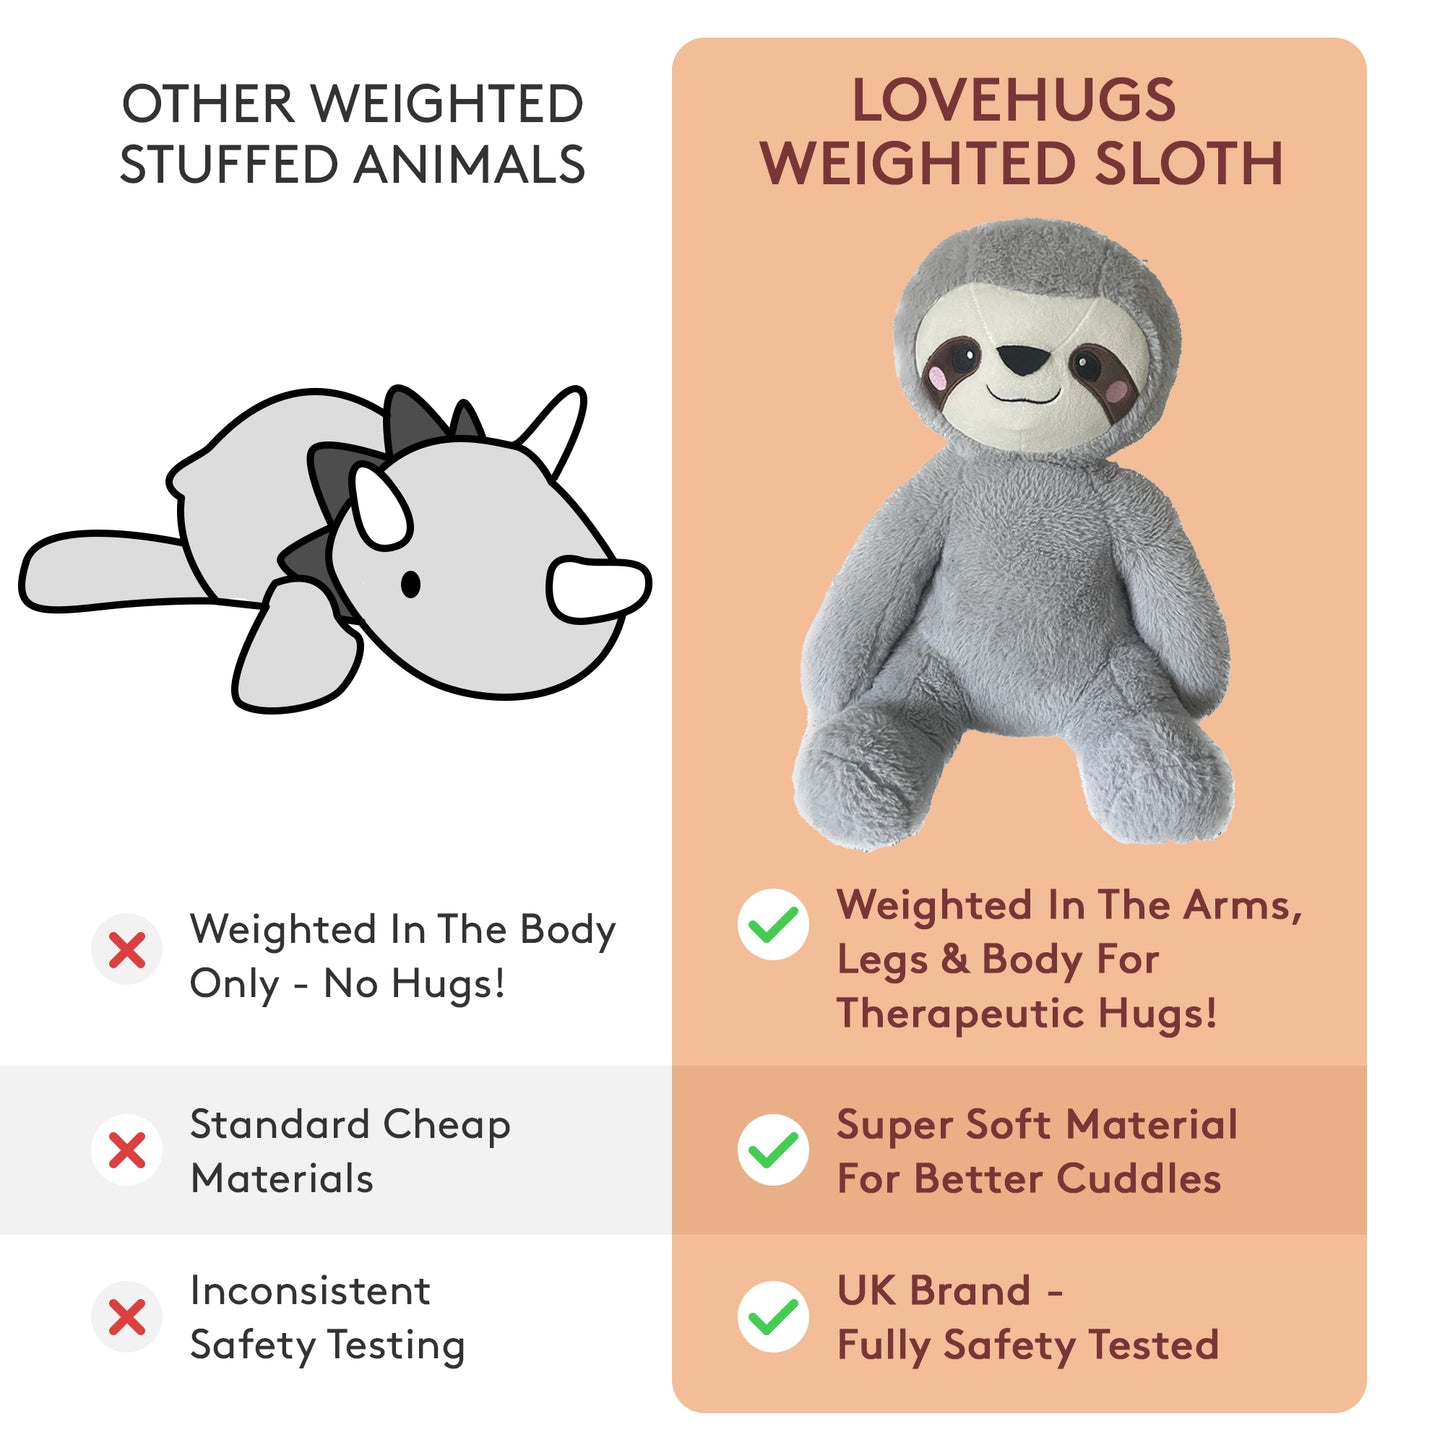 1.5kg Weighted Teddy For Anxiety - Sloth Weighted Stuffed Animal